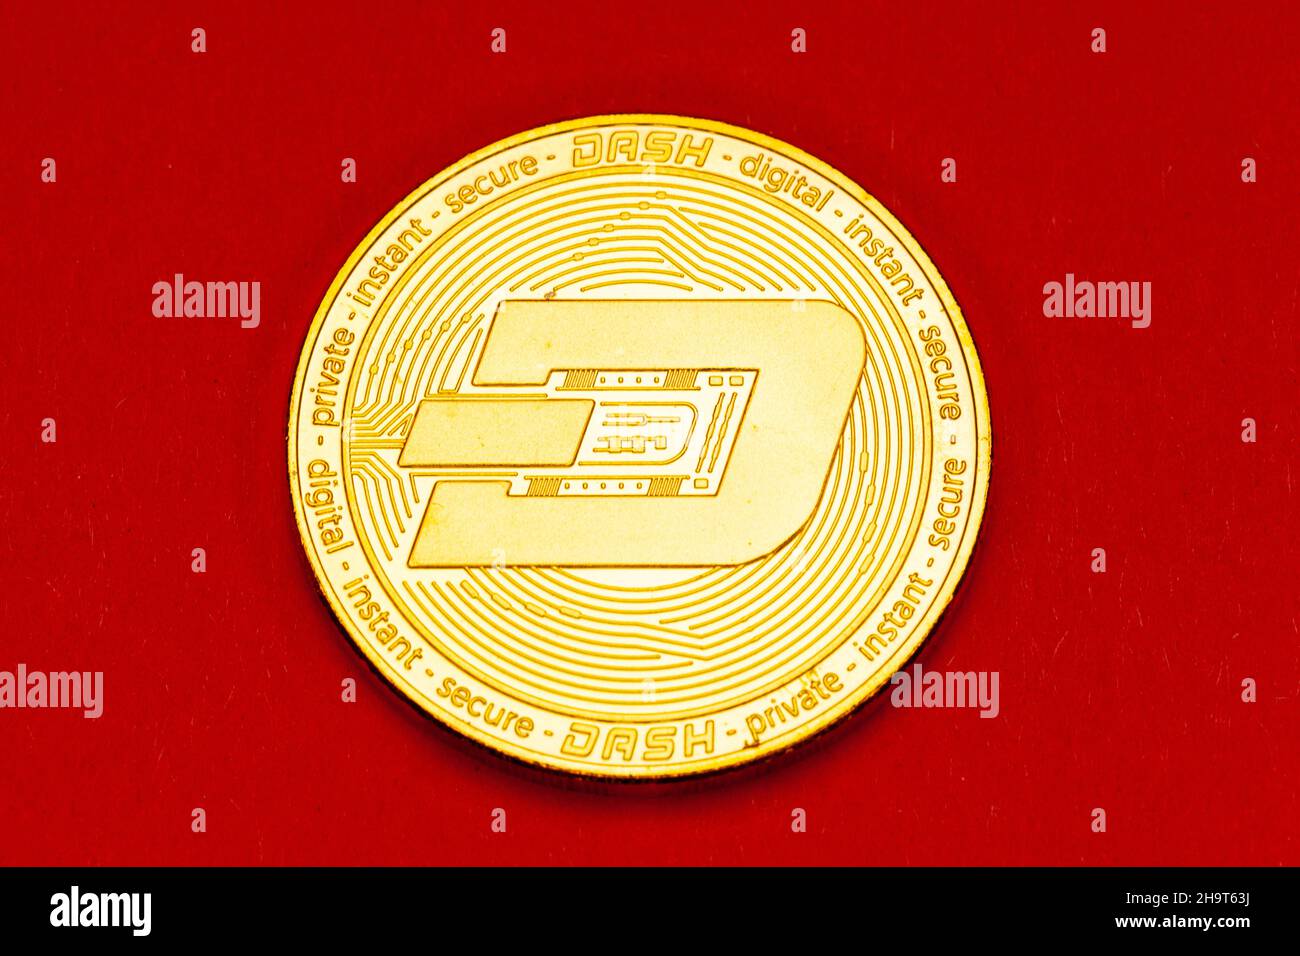 Dash physical cryptocurrencey coin. Stock Photo